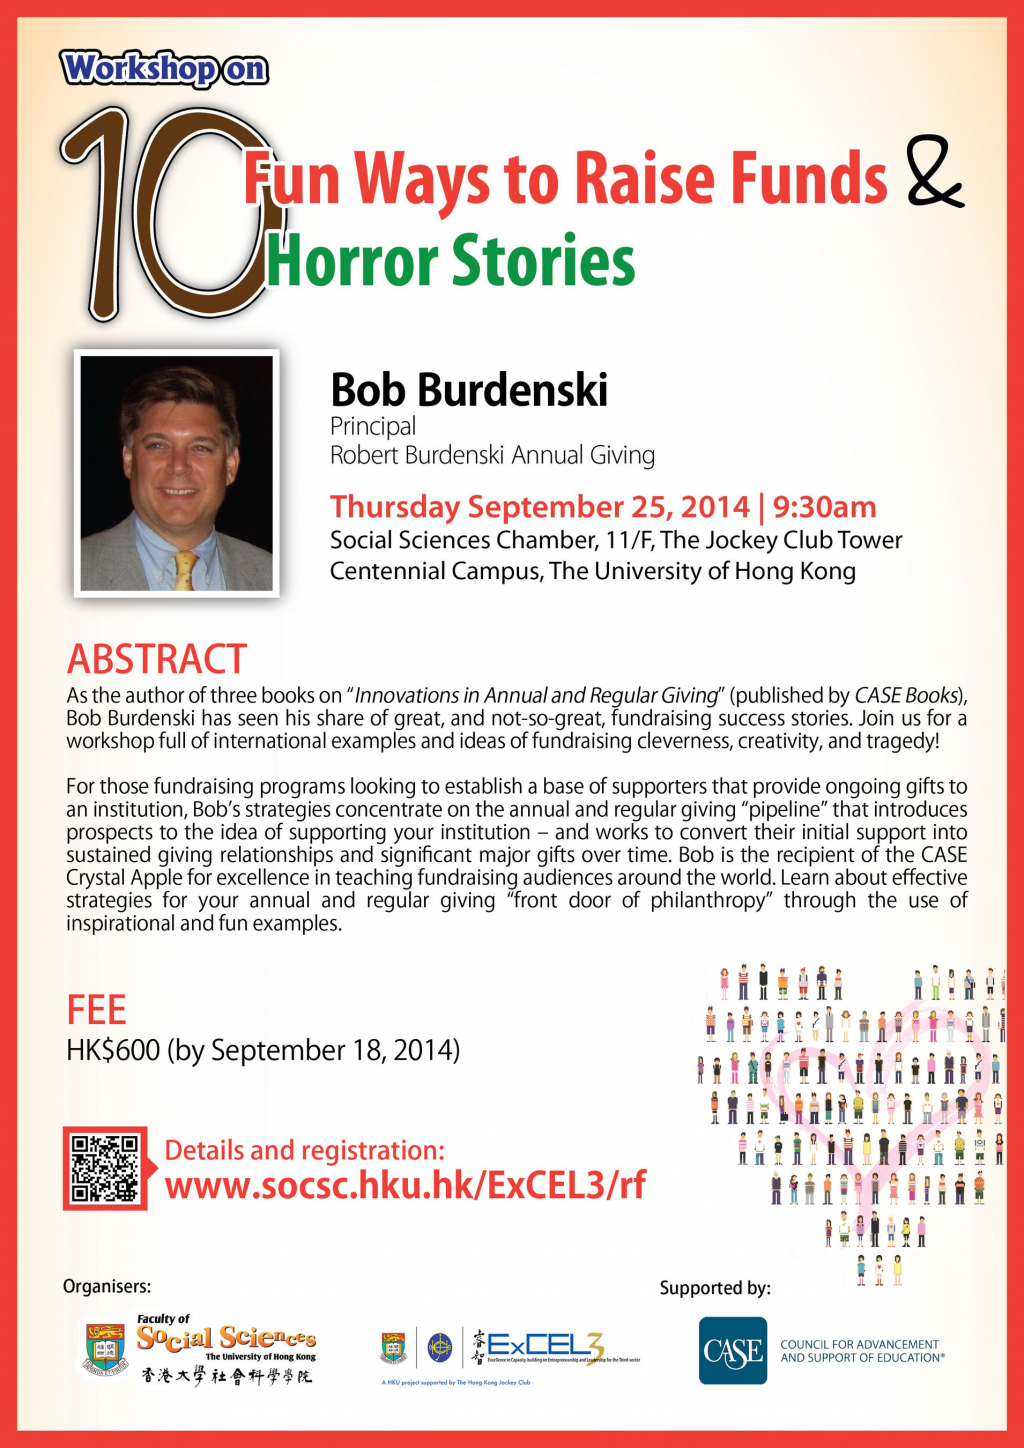 Workshop on 10 Fun Ways to Raise Funds and 10 Horror Stories